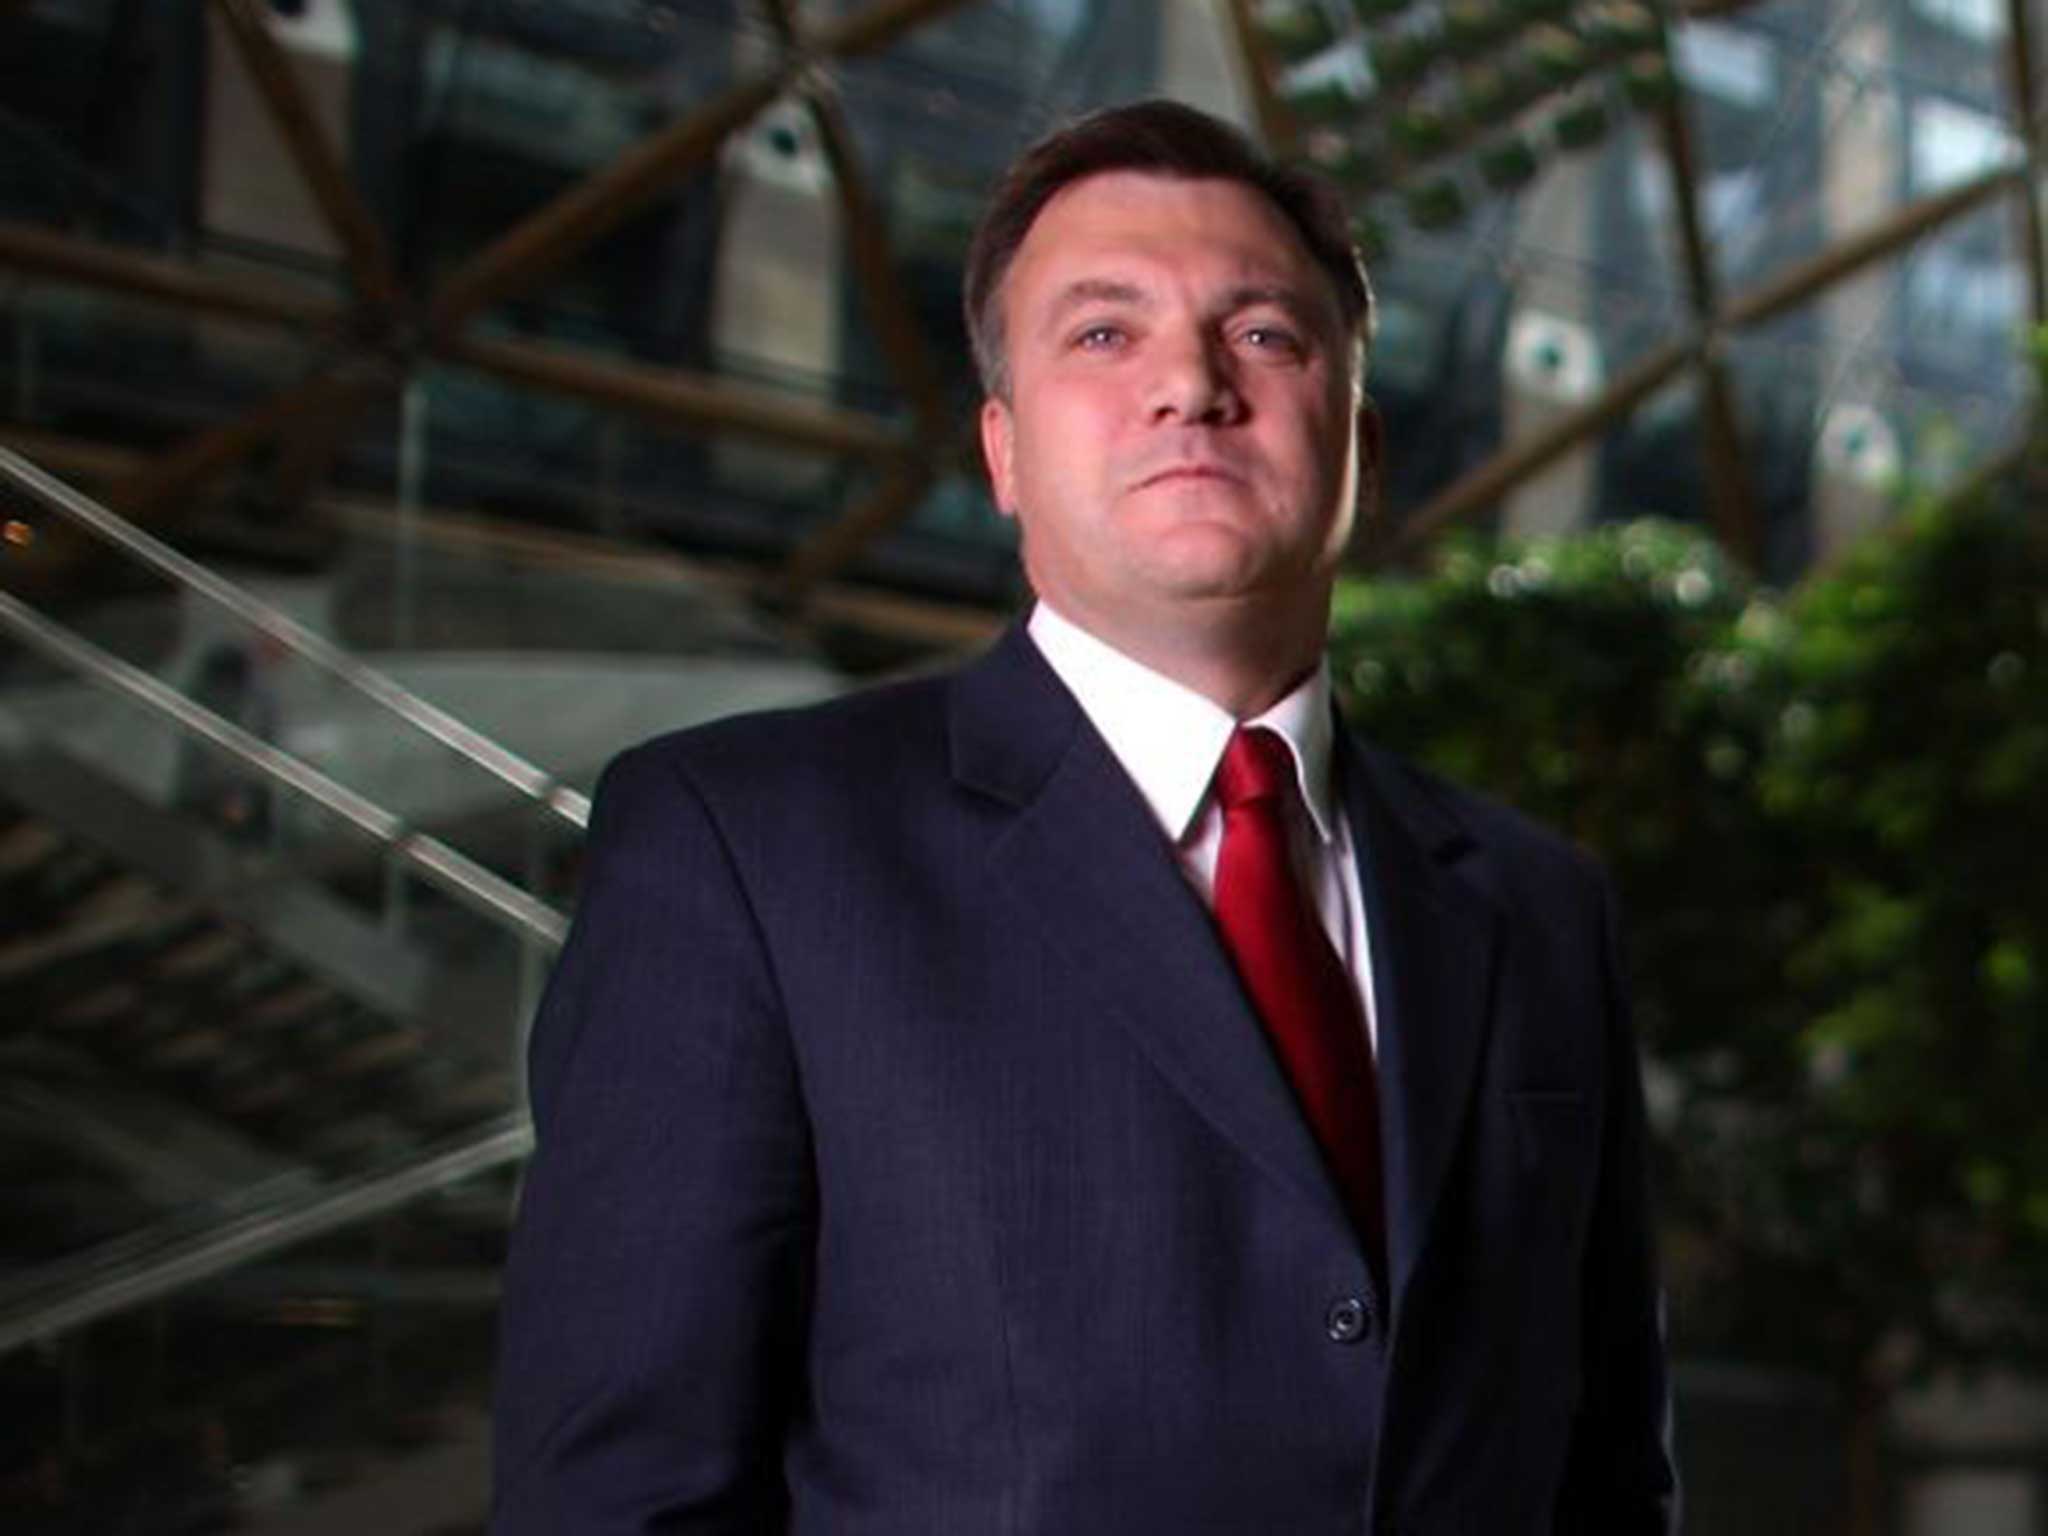 Ed Balls is in talks over staging a TV debate with George Osborne